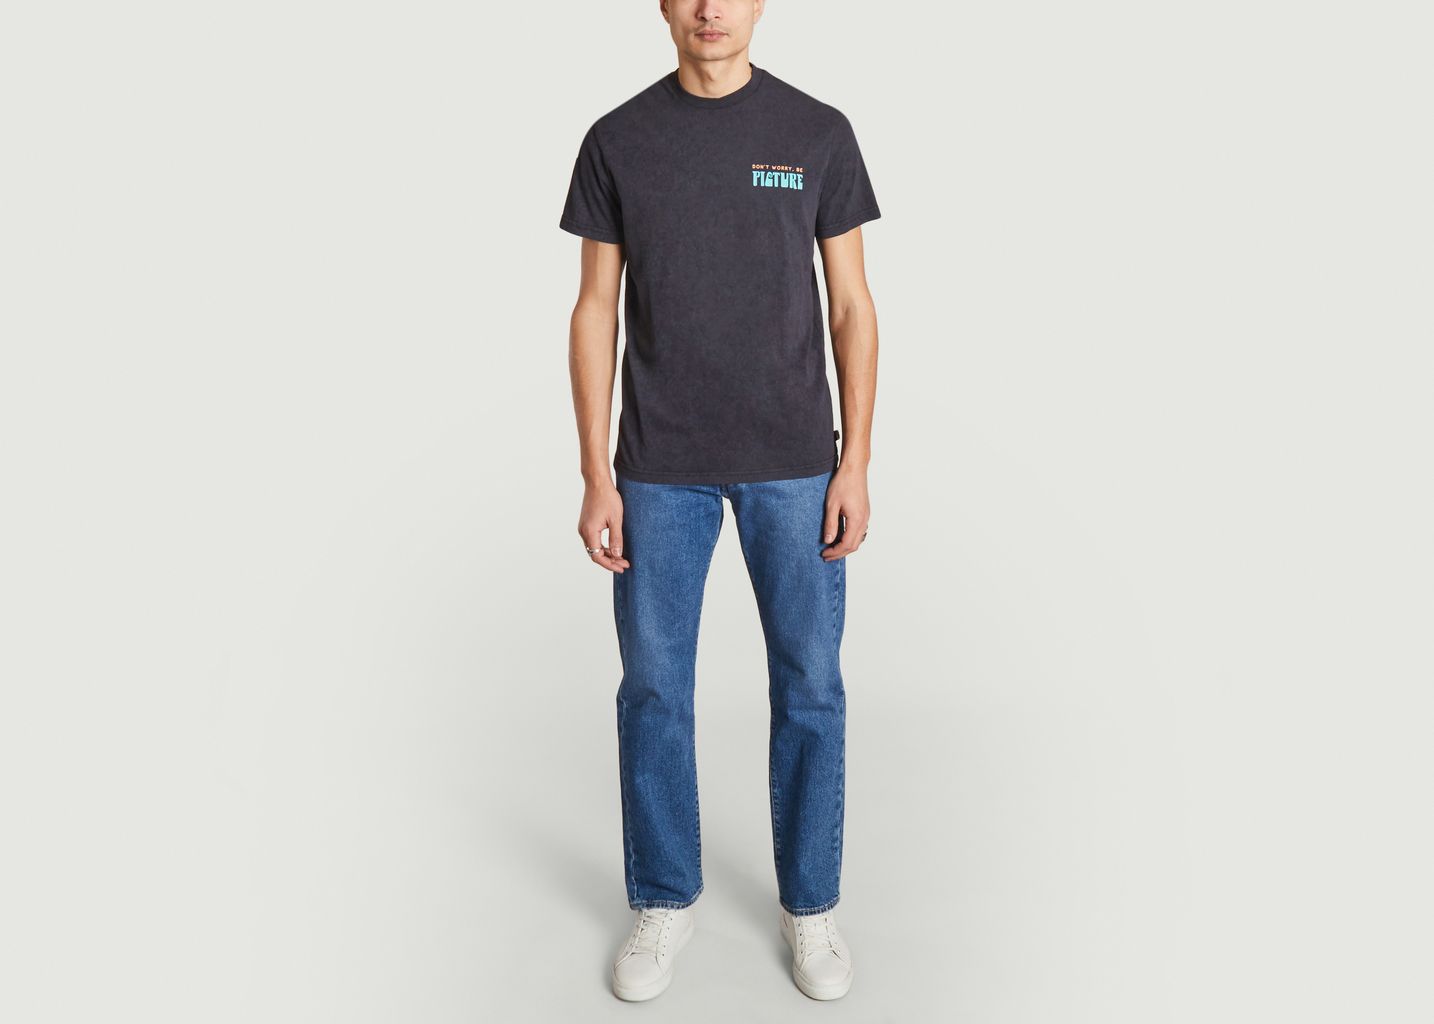 Cowley T-shirt - Picture Organic